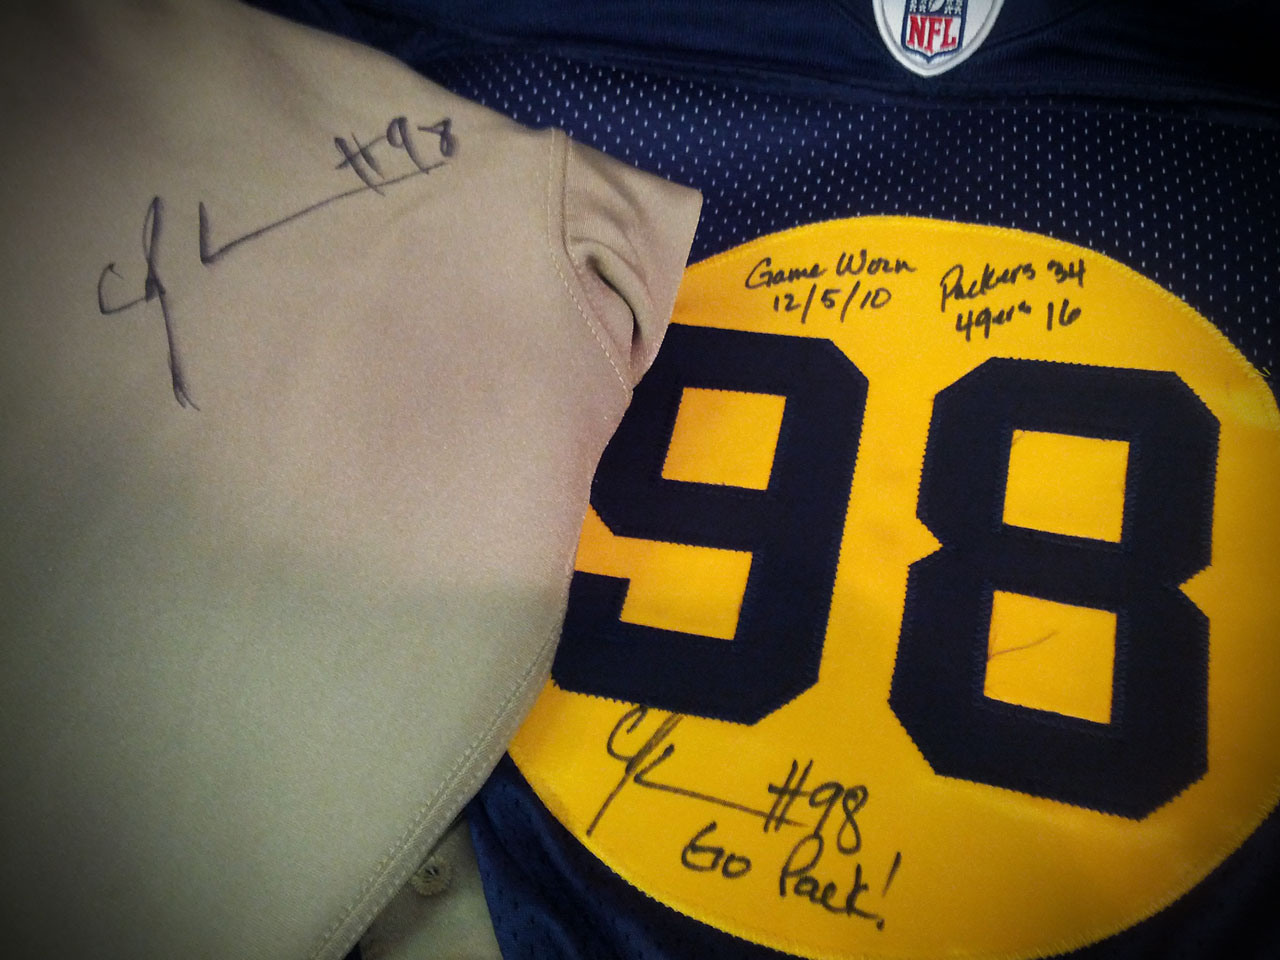 Inscribed with game score, "Game Worn 12/5/10", and signed "Go Pack" by C.J. Wilson (#98)